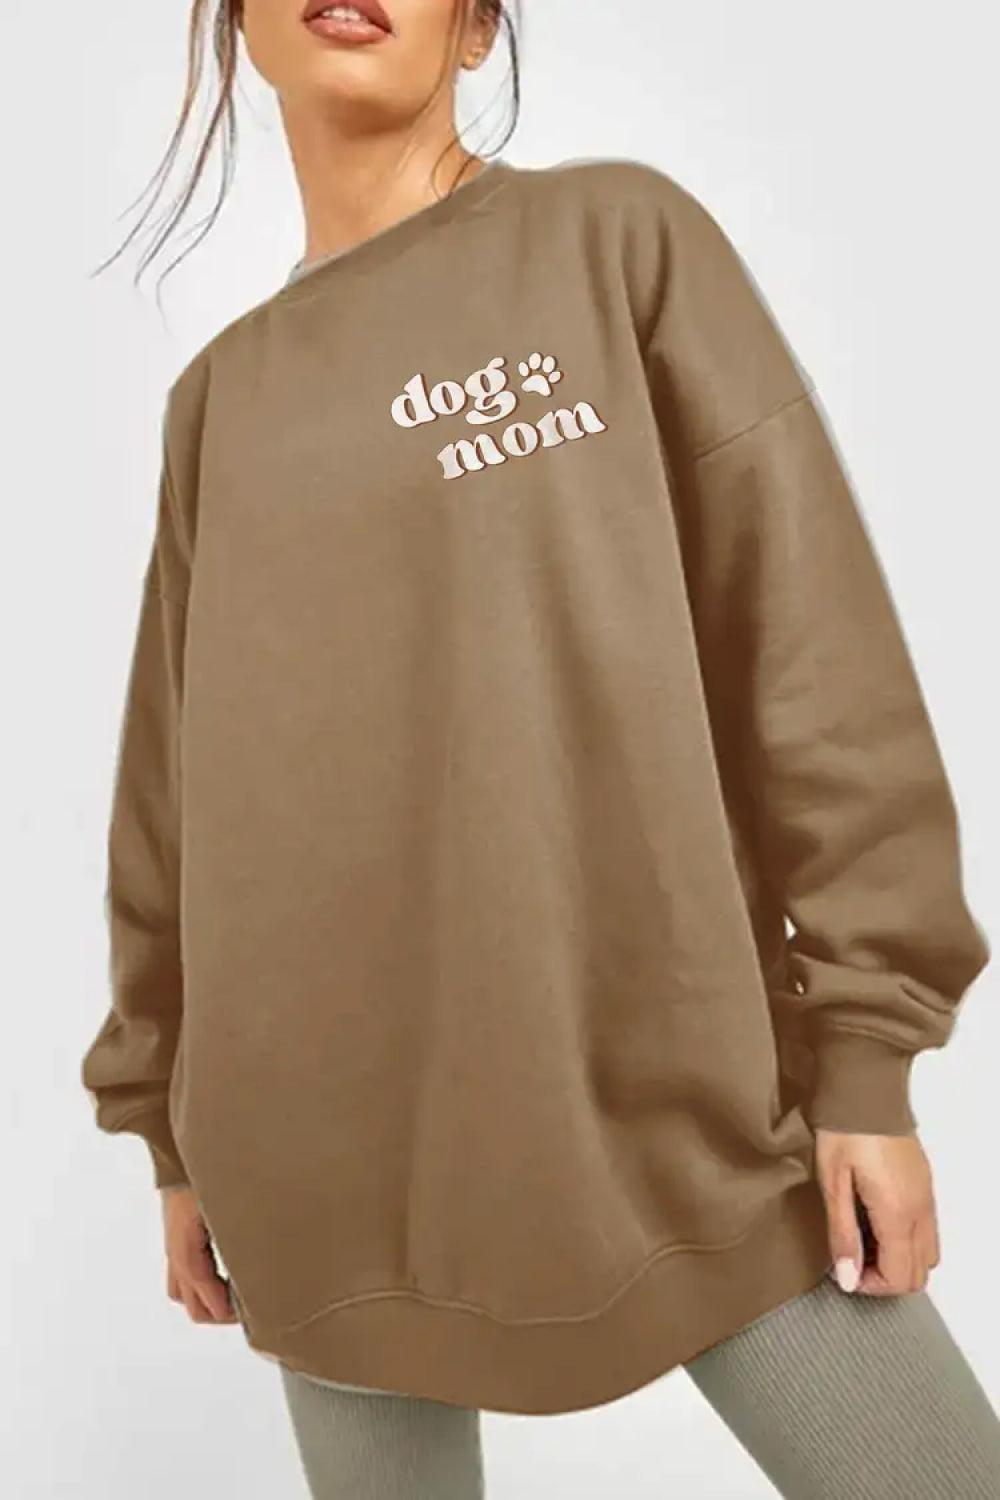 Simply Love Full Size Round Neck Dropped Shoulder DOG MOM Graphic Sweatshirt - Crazy Like a Daisy Boutique #